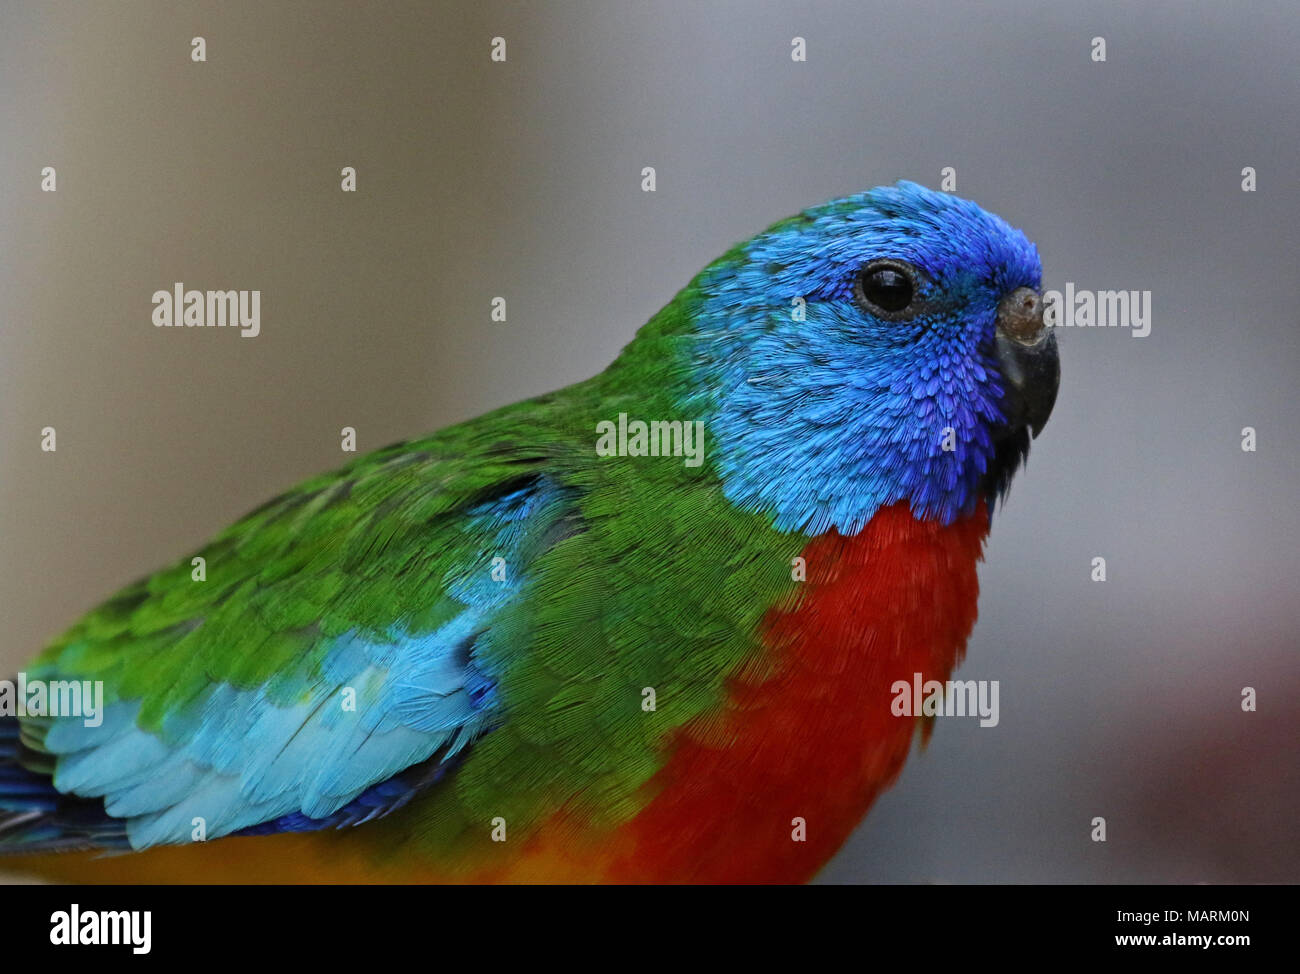 A side view of a Scarlet-Chested Parrot (Neophema splendida). Stock Photo